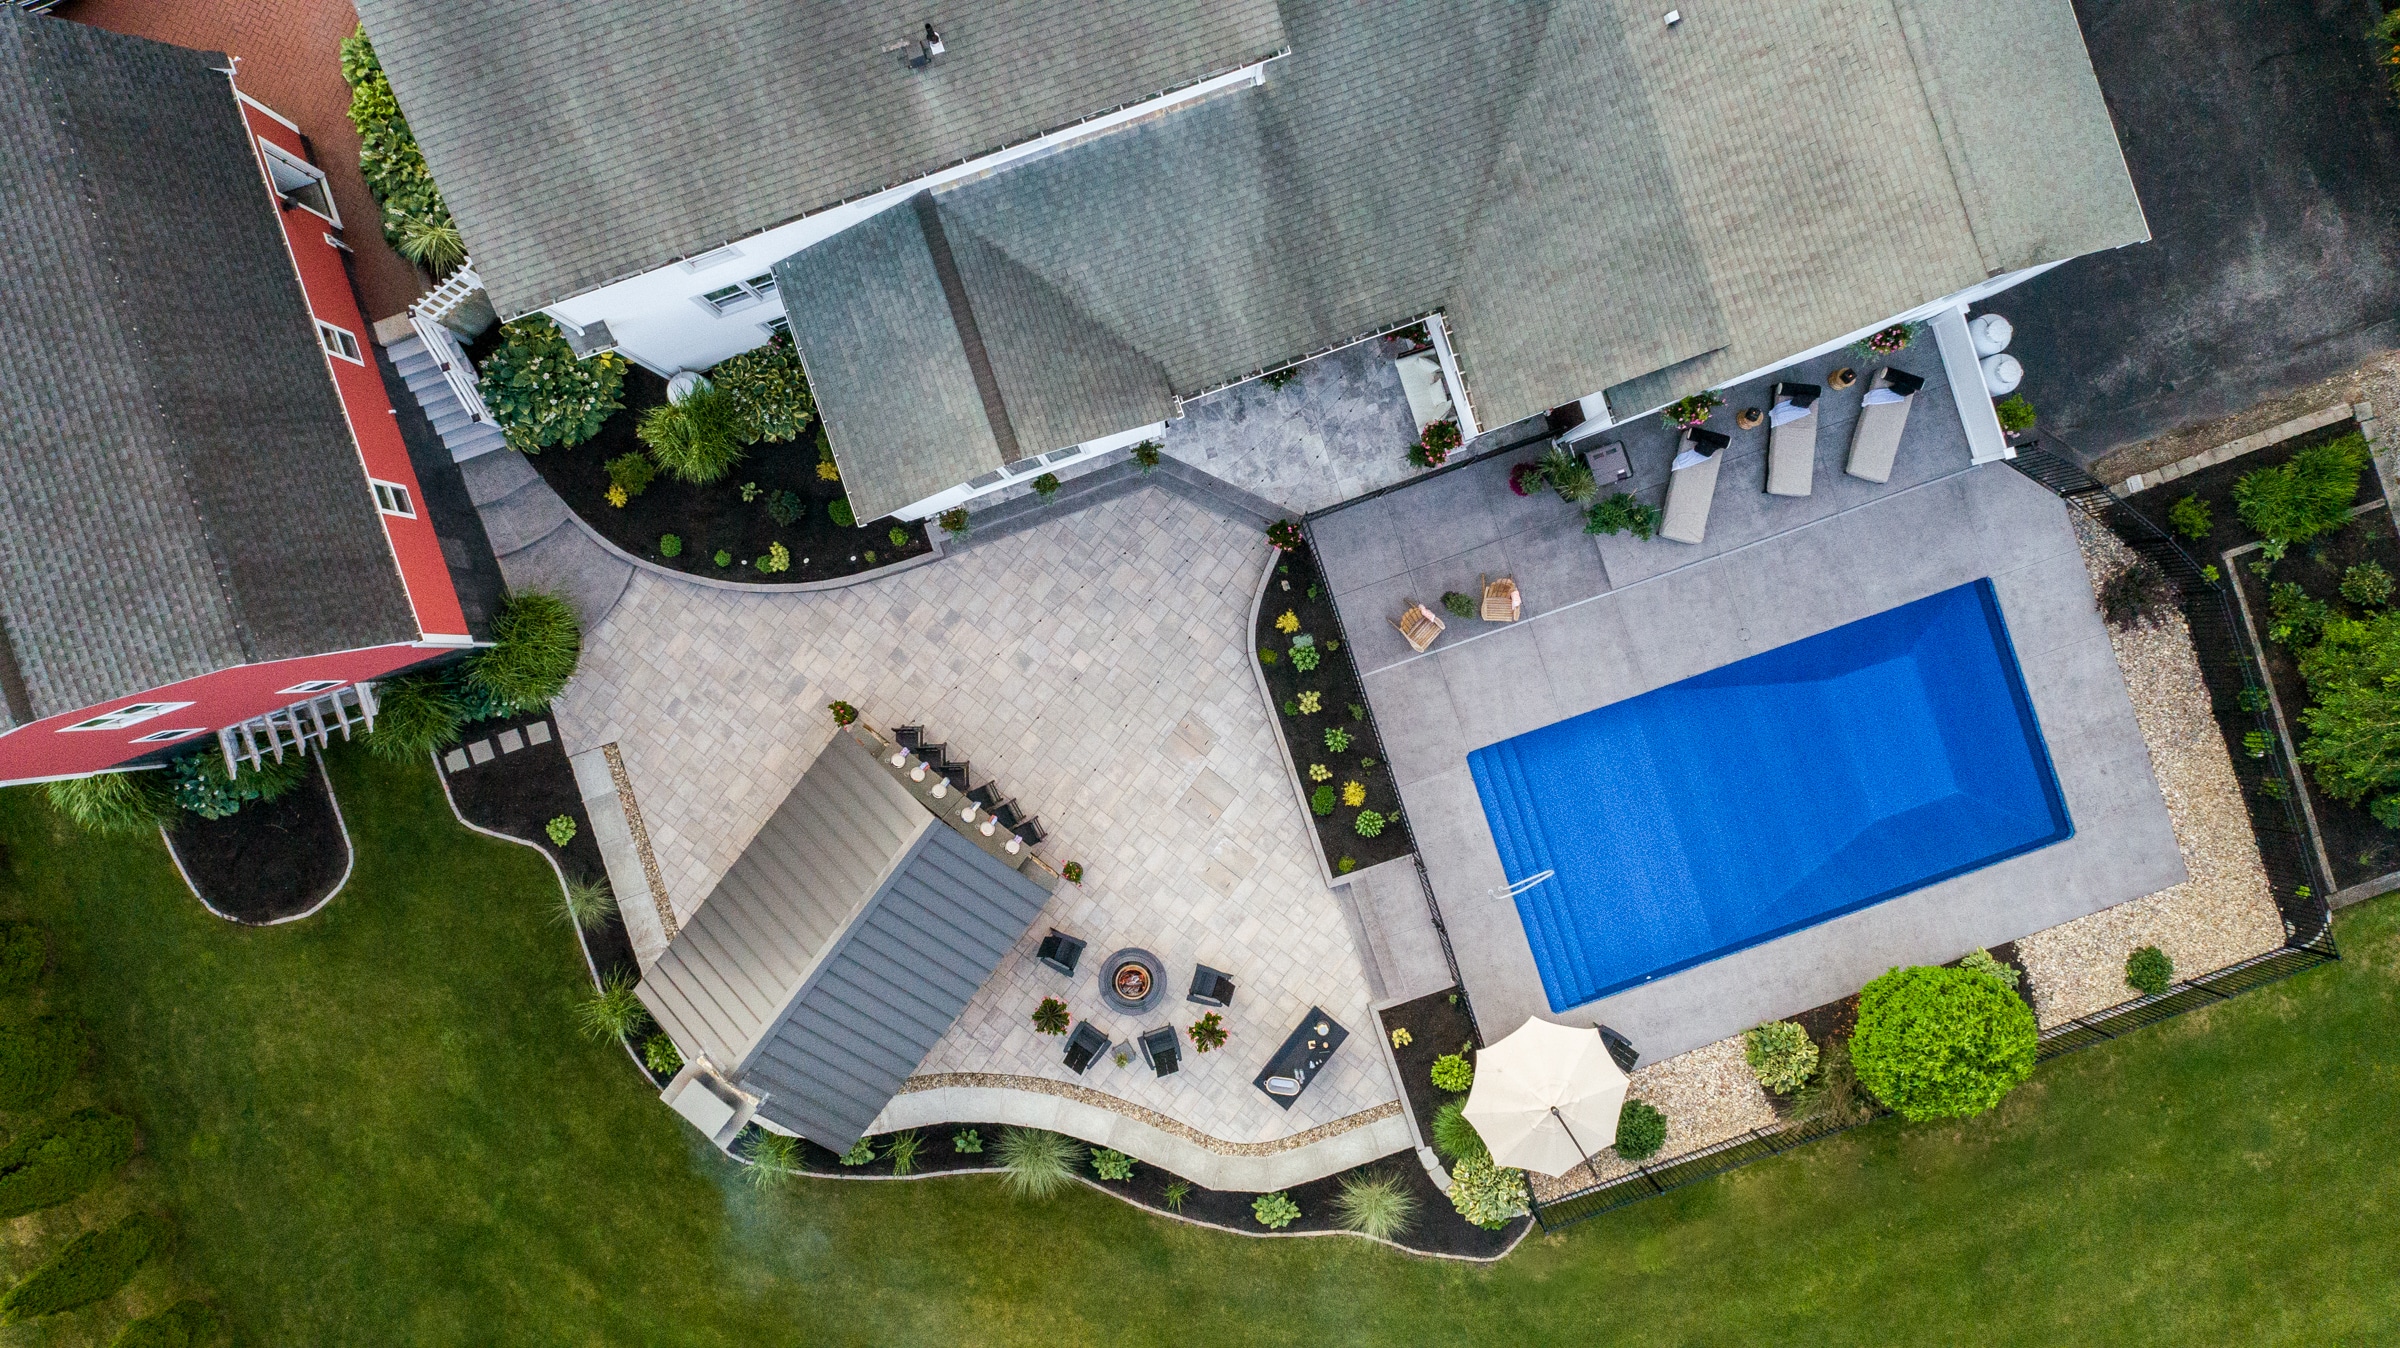 Aerial view of the backyard renovation project designed and built by Dex by Terra in Auburn Massachusetts.